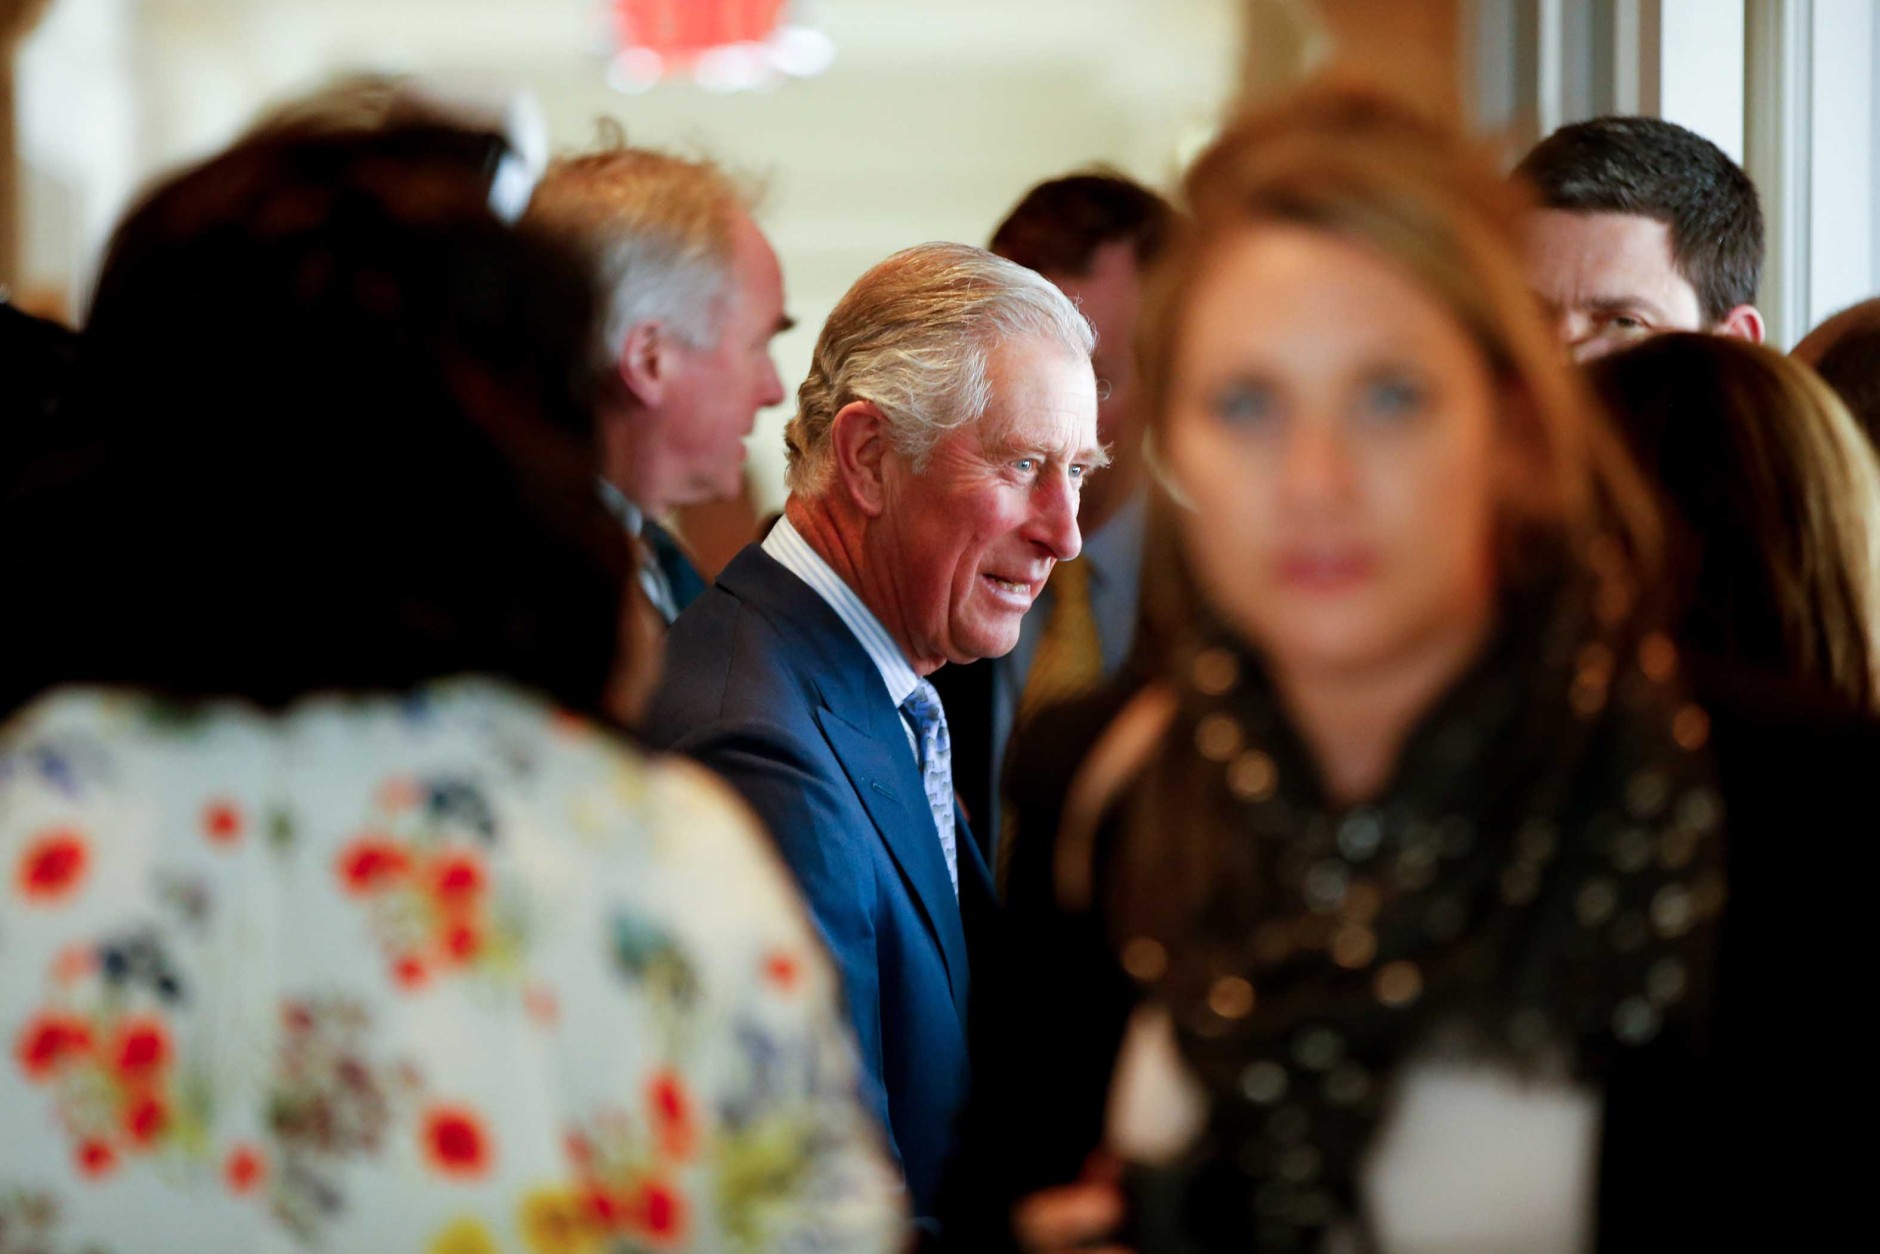 Britain’s Prince Charles arrives to speak at a meeting of companies, leading environmental organizations and government figures brought together to consider actions to address the threat posed by marine plastic waste, Wednesday, March 18, 2015, at the Hay Adams Hotel in Washington. (AP Photo/Andrew Harnik)